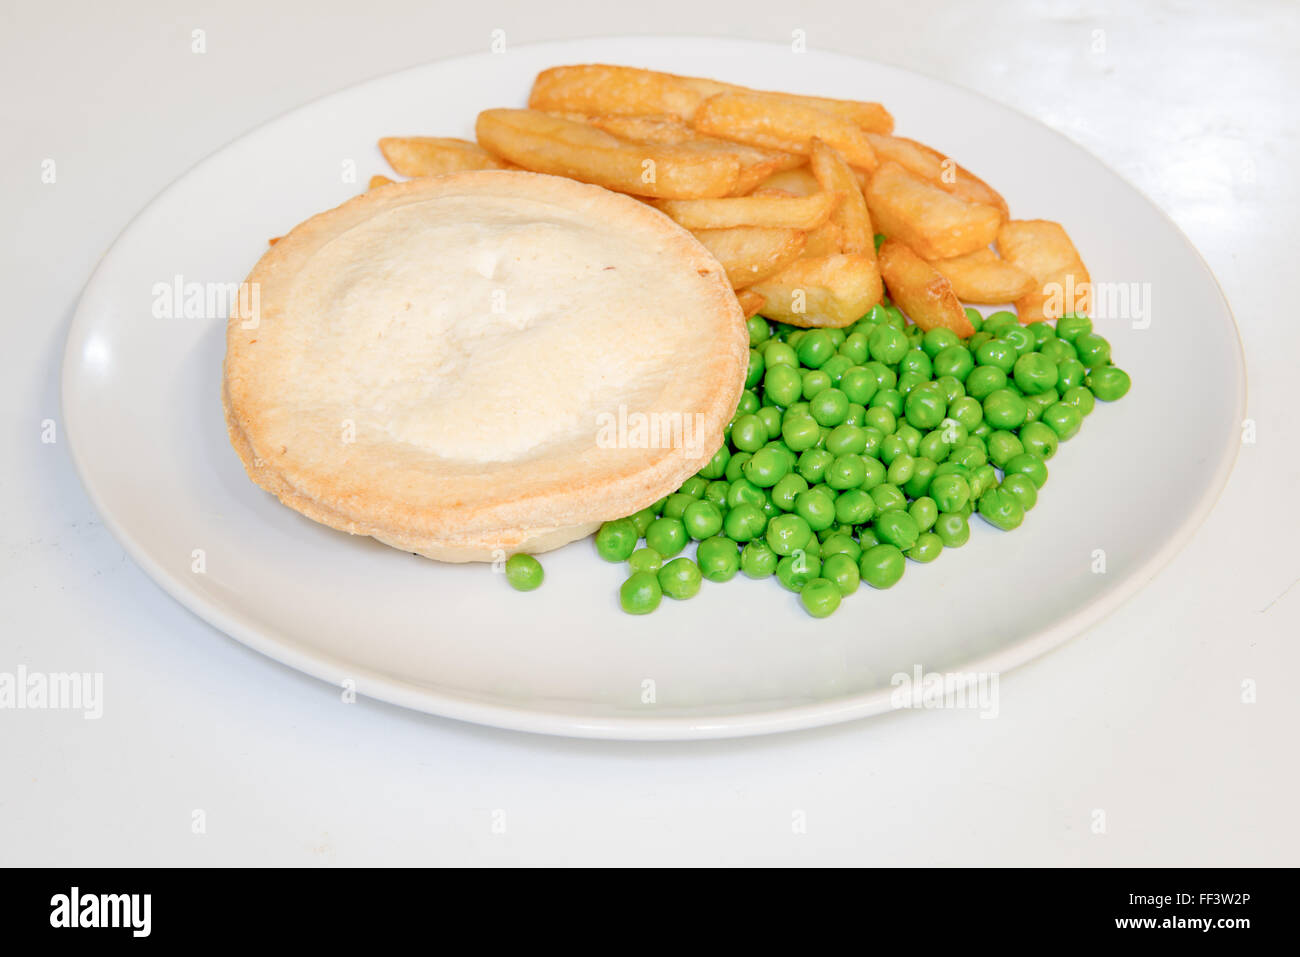 Pastry baked pie with chips and peas on a plate Stock Photo